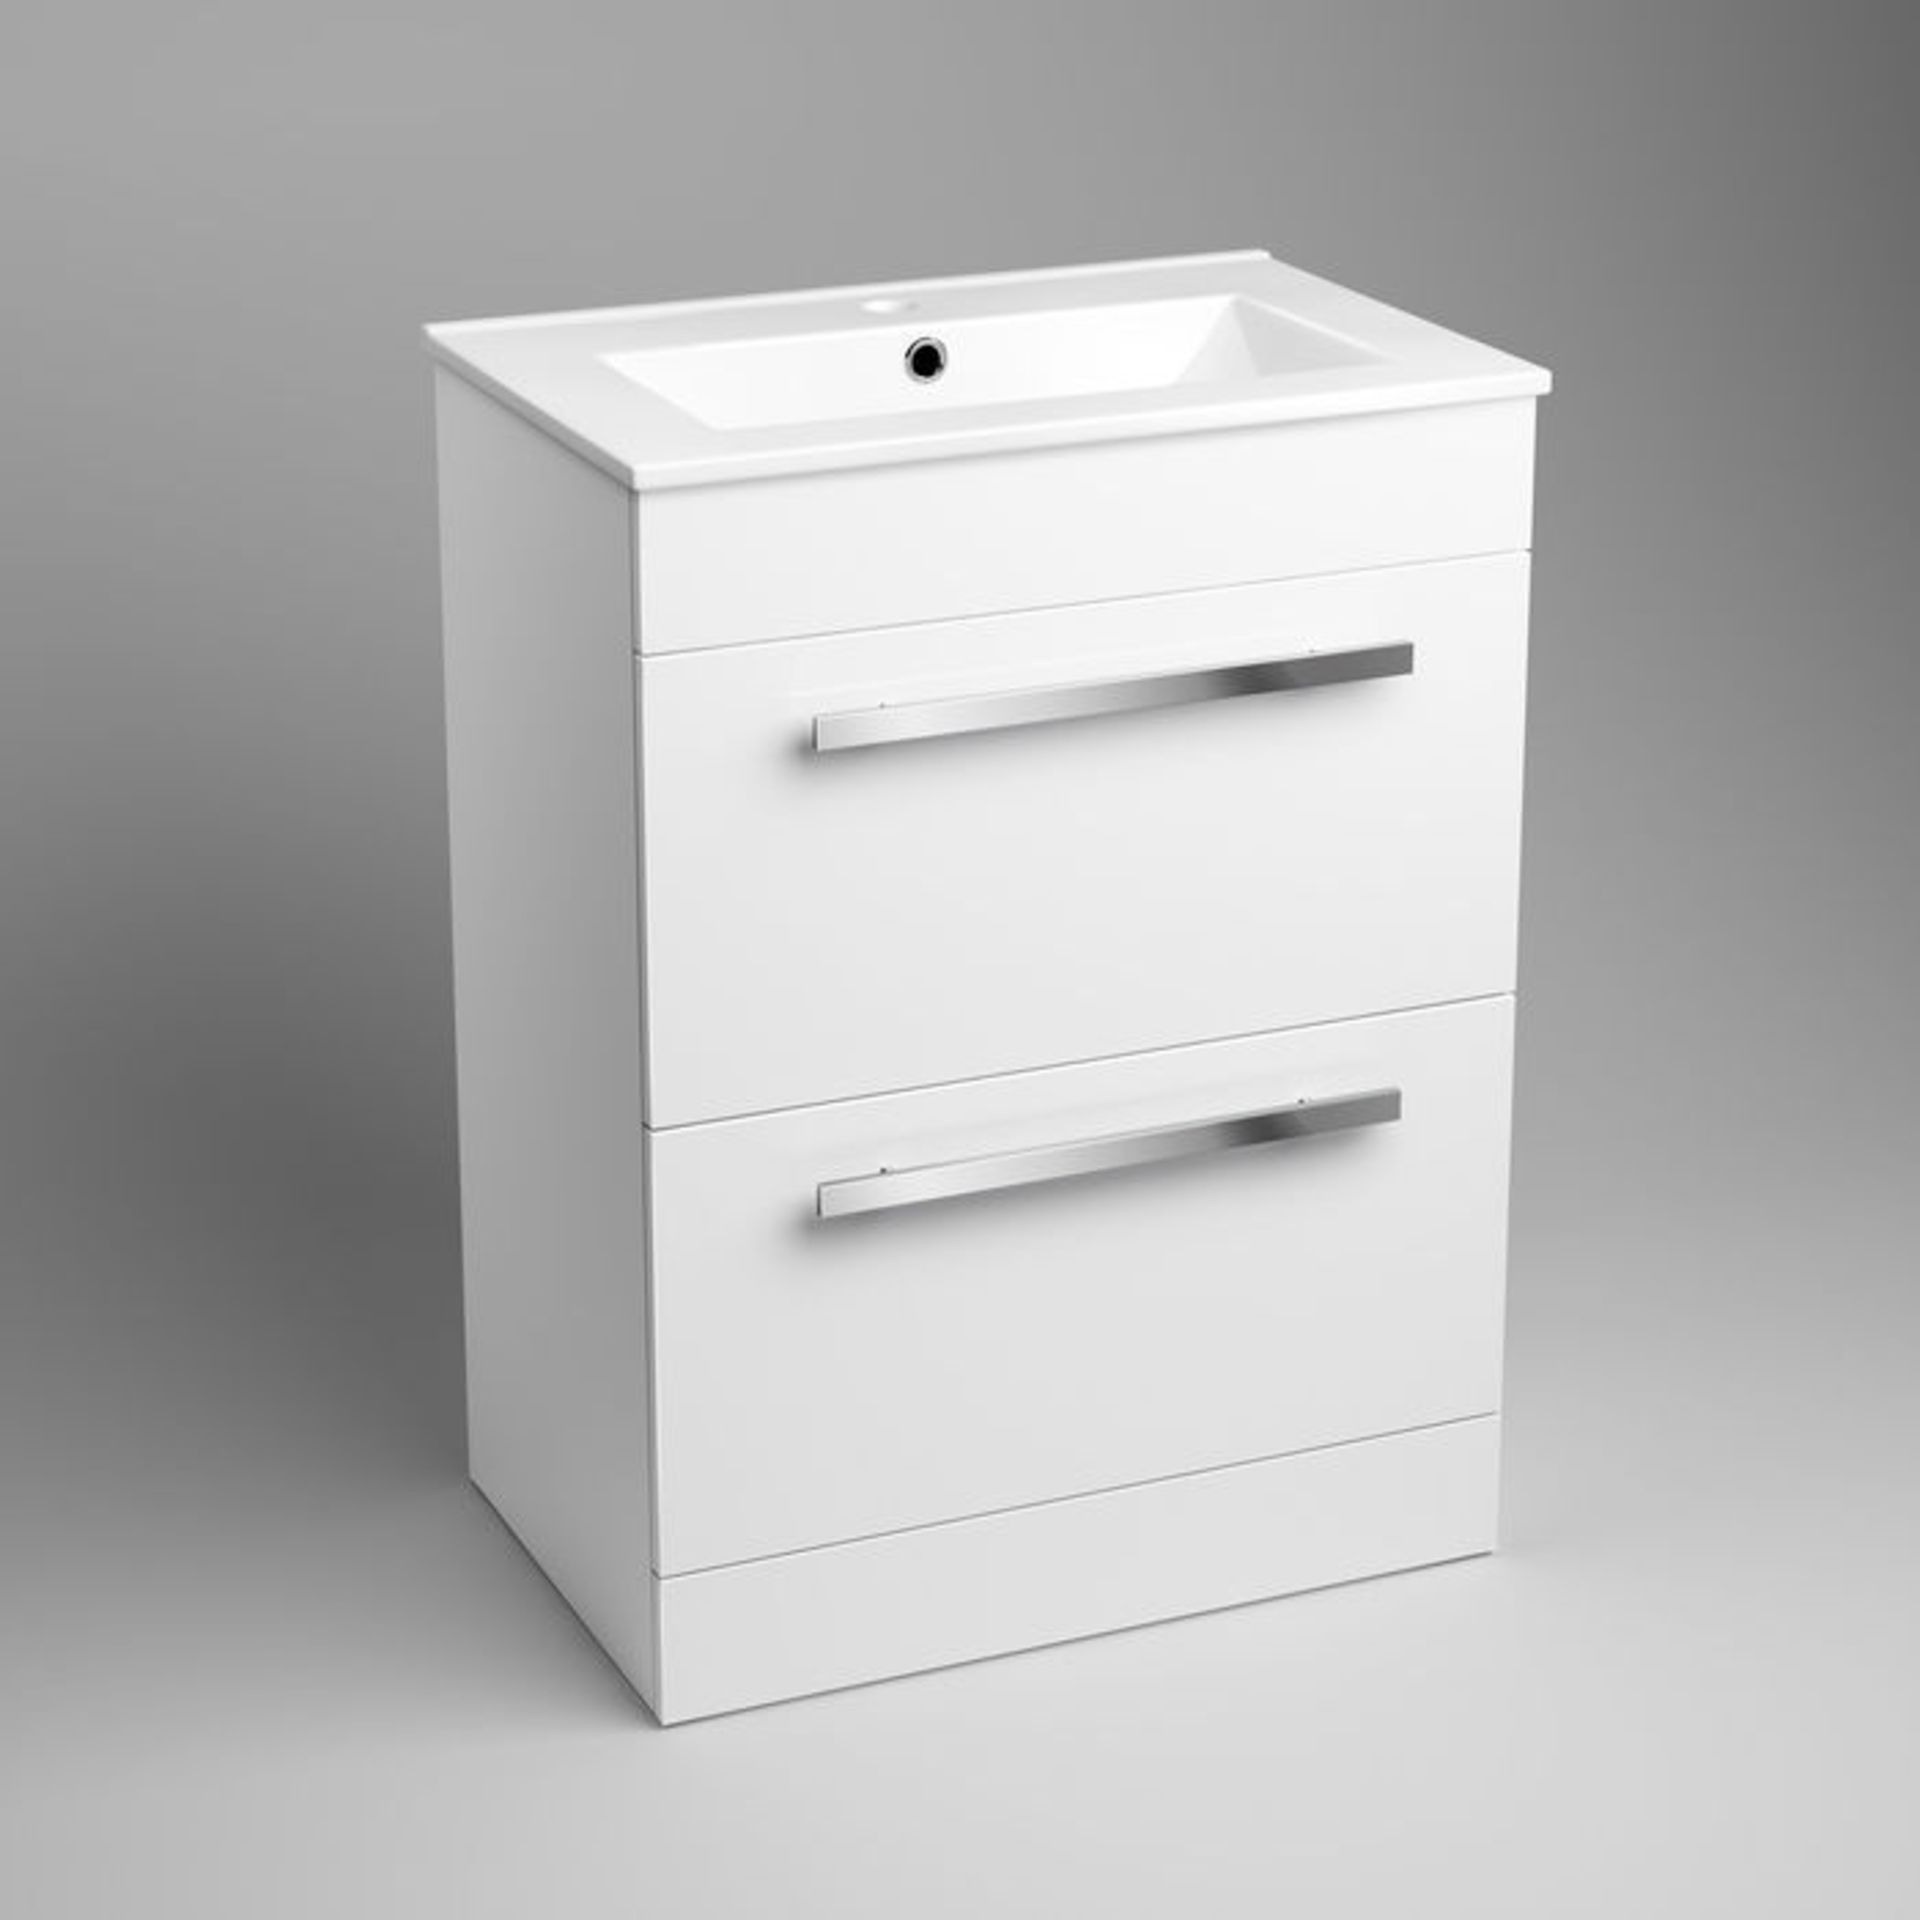 (DK305) 600mm Avon High Gloss White Double Drawer Basin Cabinet - Floor Standing. RRP £499.99. Comes - Image 4 of 5